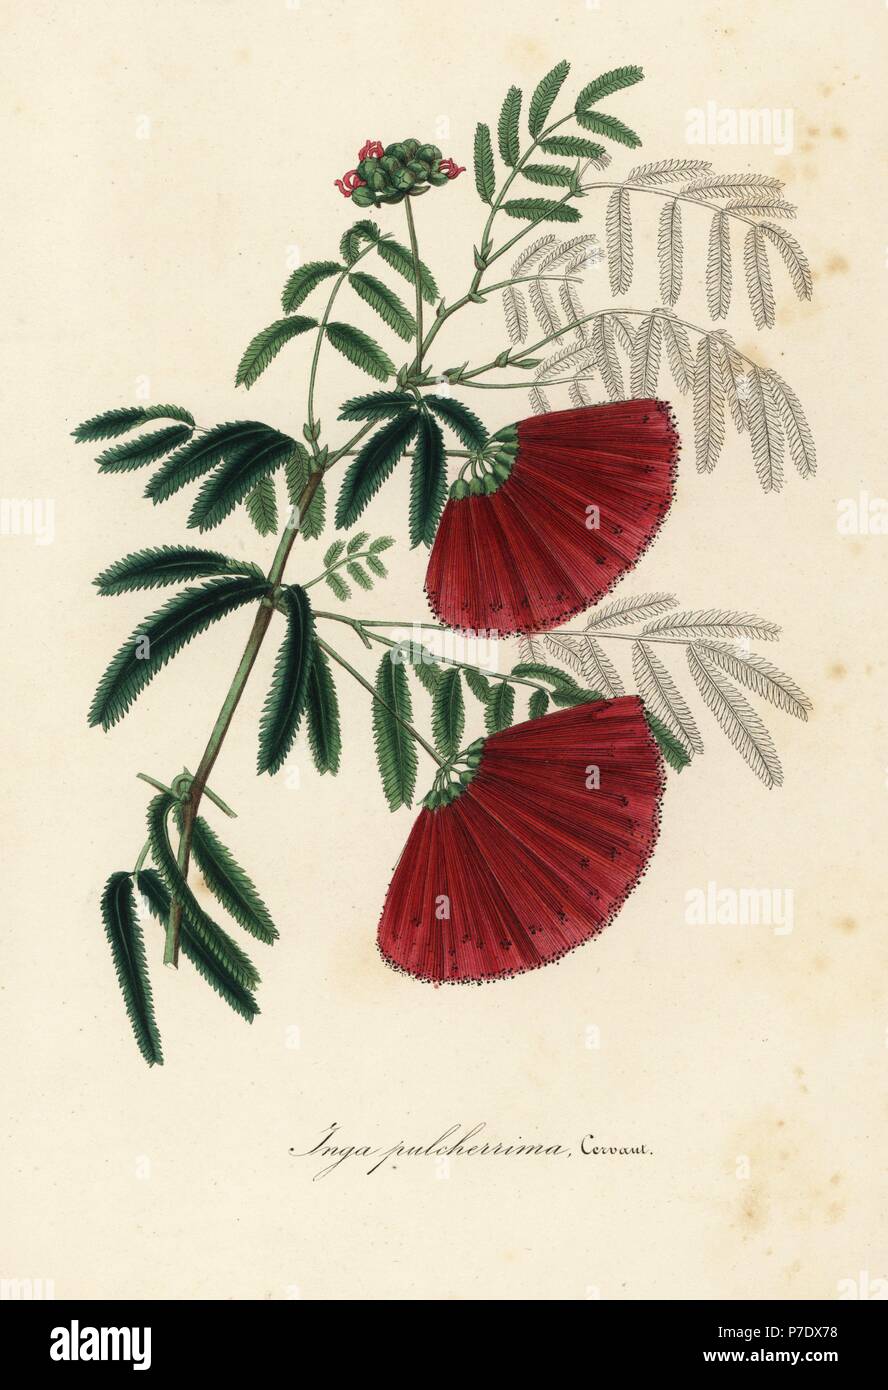 Mexican flamebush, Inga pulcherrima Cerv. Handcoloured lithograph from Louis van Houtte and Charles Lemaire's Flowers of the Gardens and Hothouses of Europe, Flore des Serres et des Jardins de l'Europe, Ghent, Belgium, 1845. Stock Photo